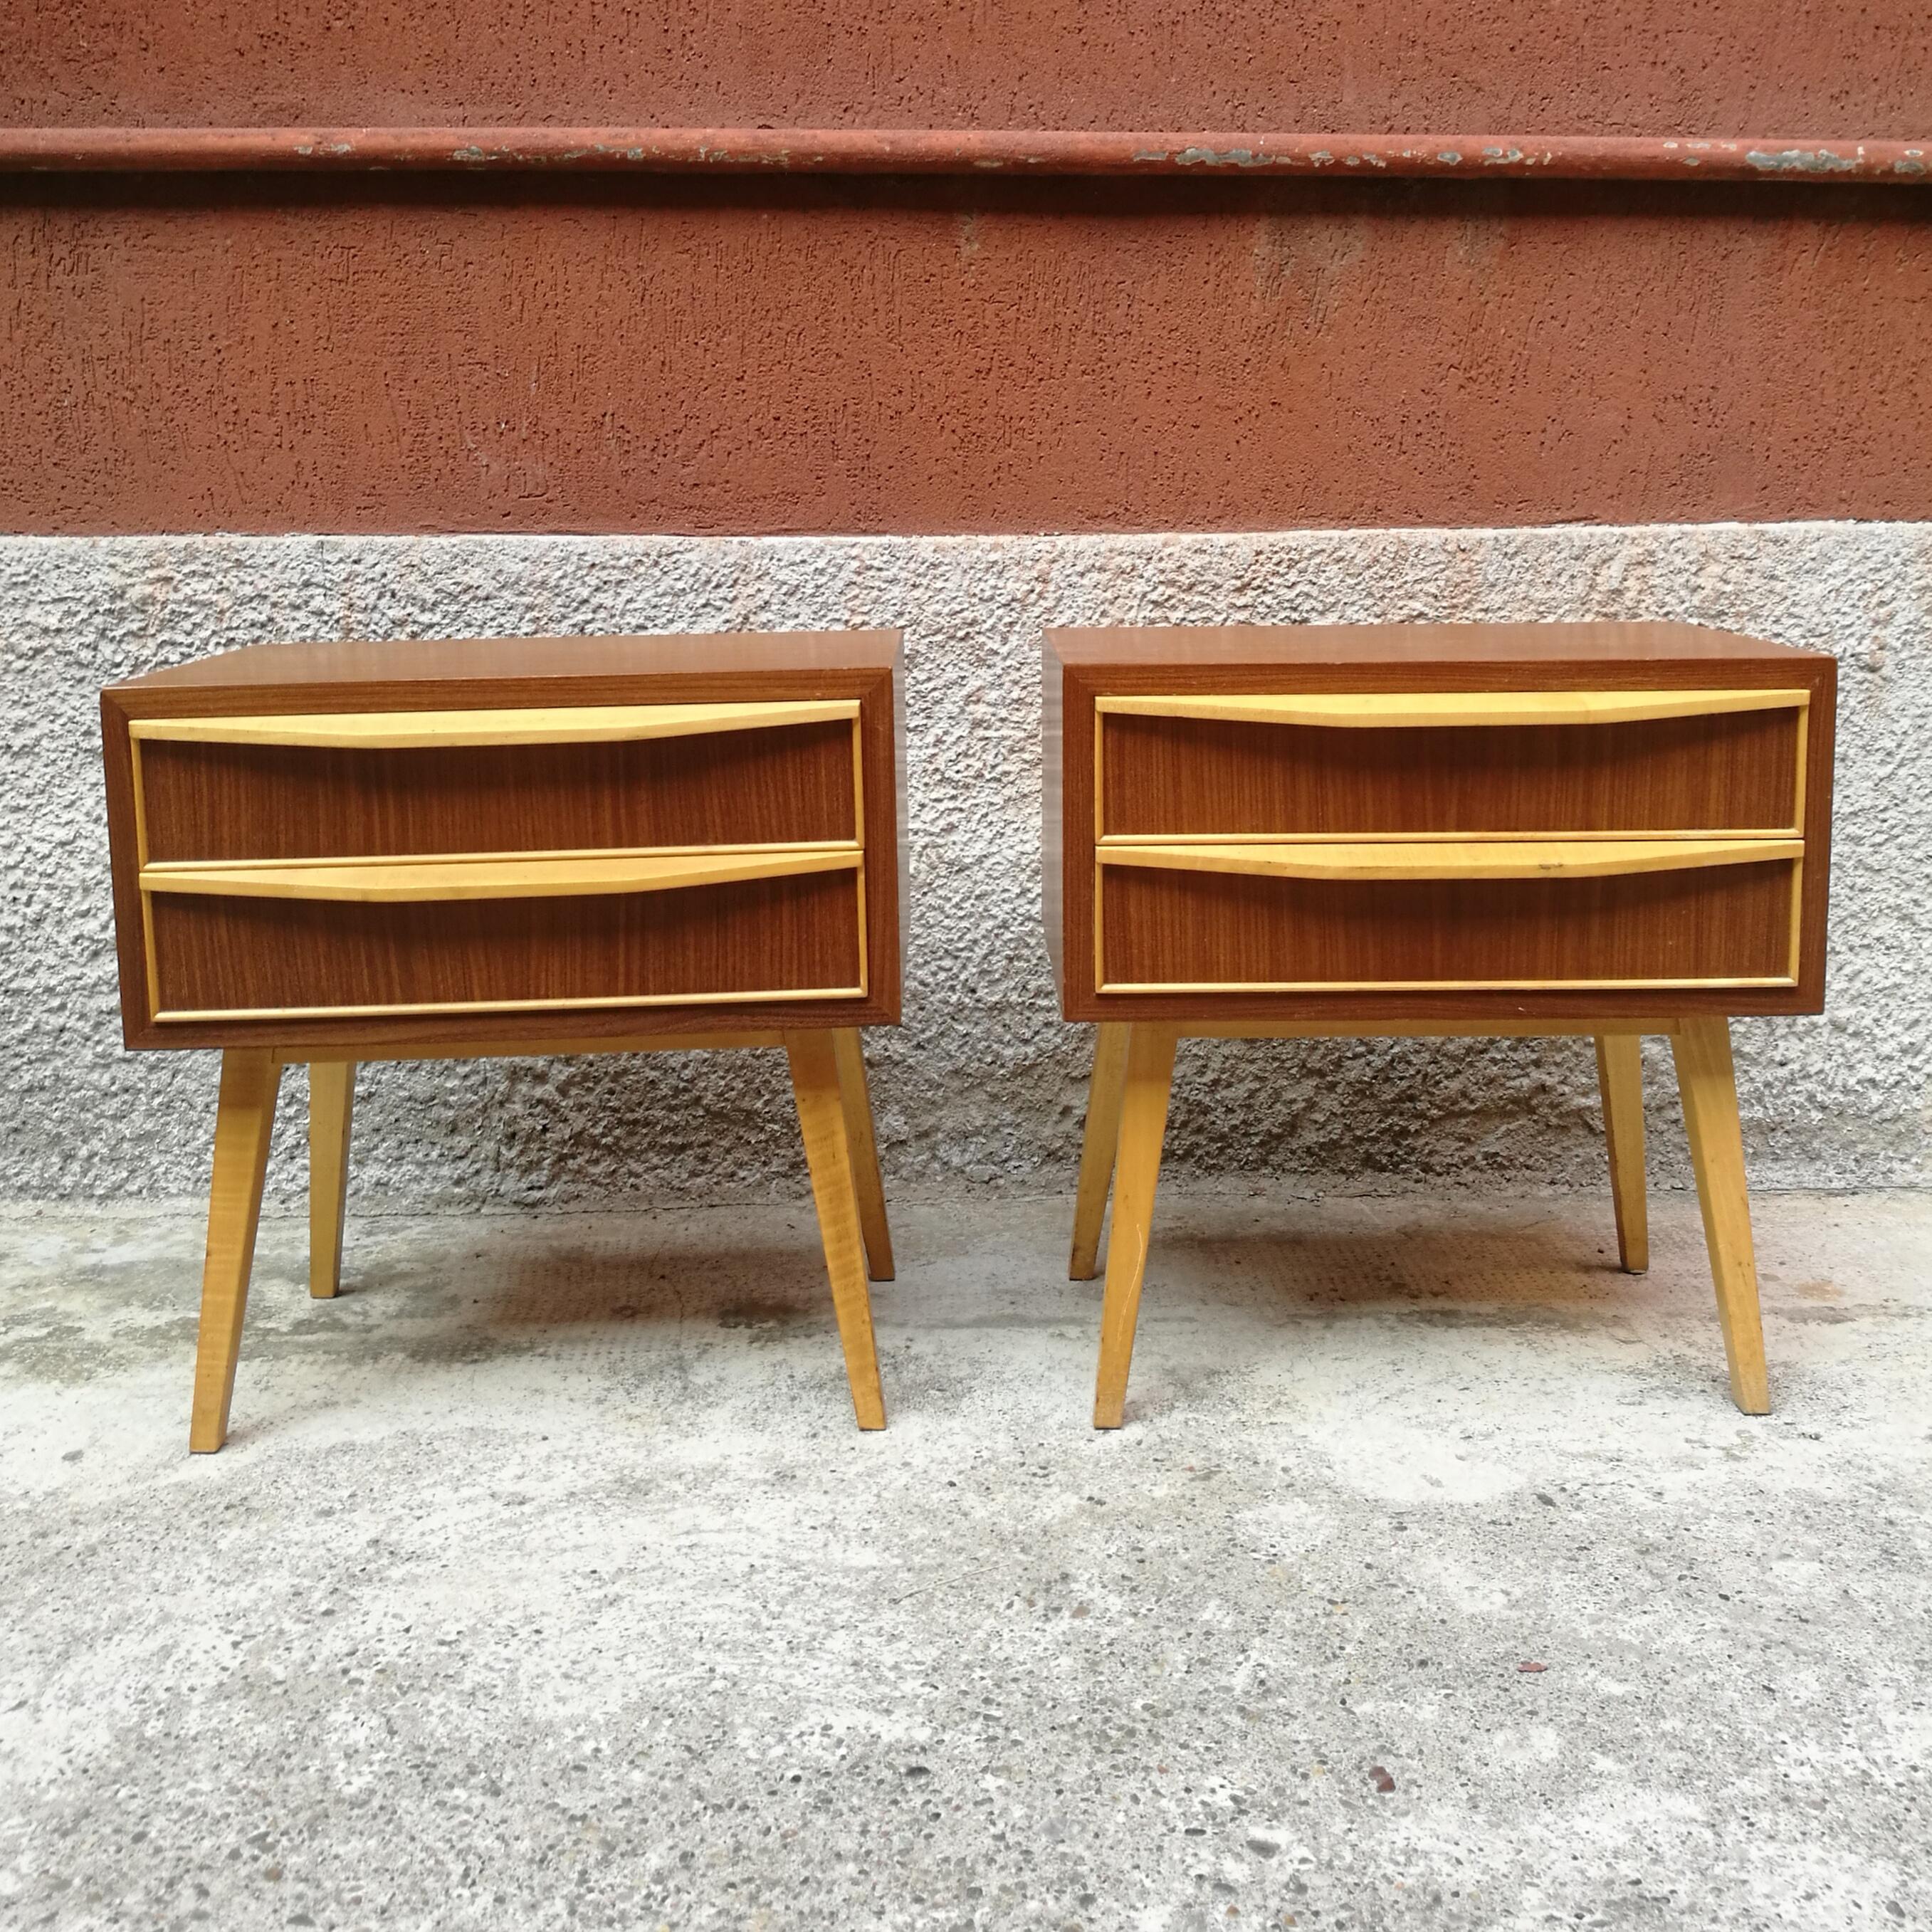 Danish bedside tables in teak from 1960s
Couple of Danish bedside tables from 1960s, all structured in wood, with a different color on the handles and legs. Two drawers for each. Really rare and interesting for essentiality and dimension. Don't